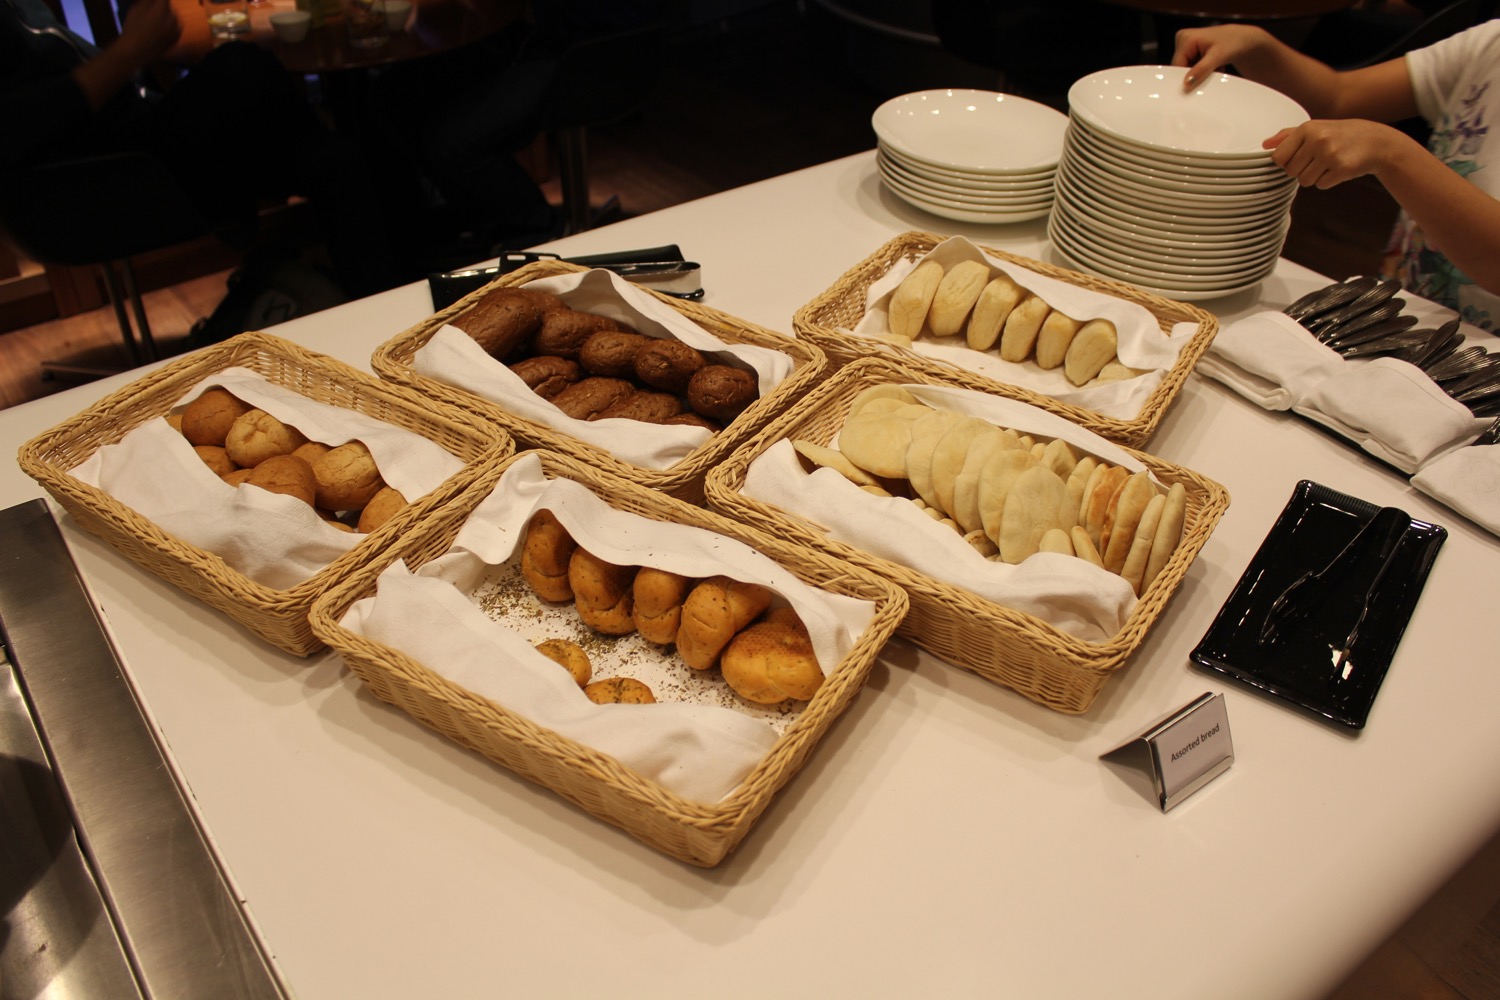 baskets of bread and rolls on a table